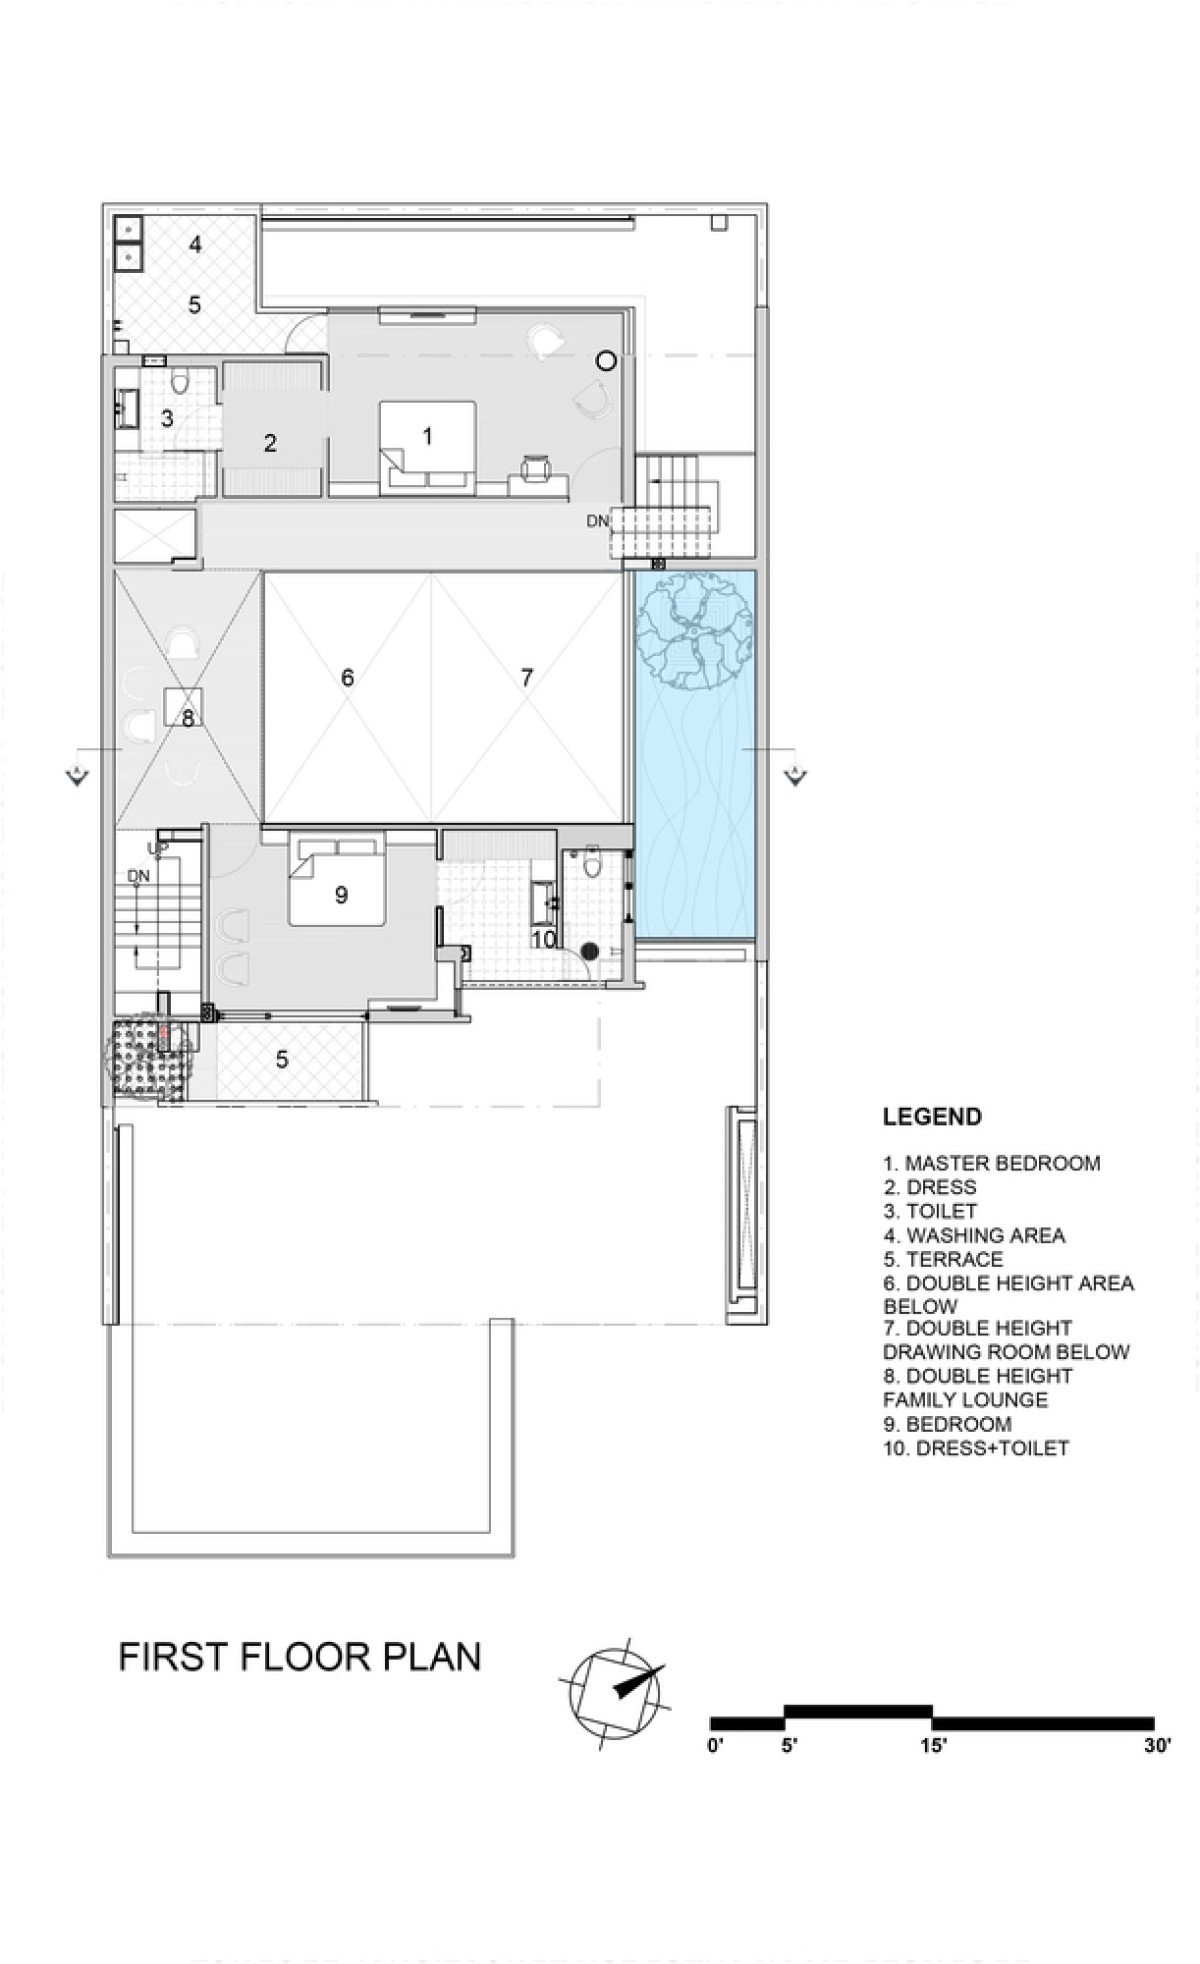 First Floor Plan of Residence 913 by Charged Voids